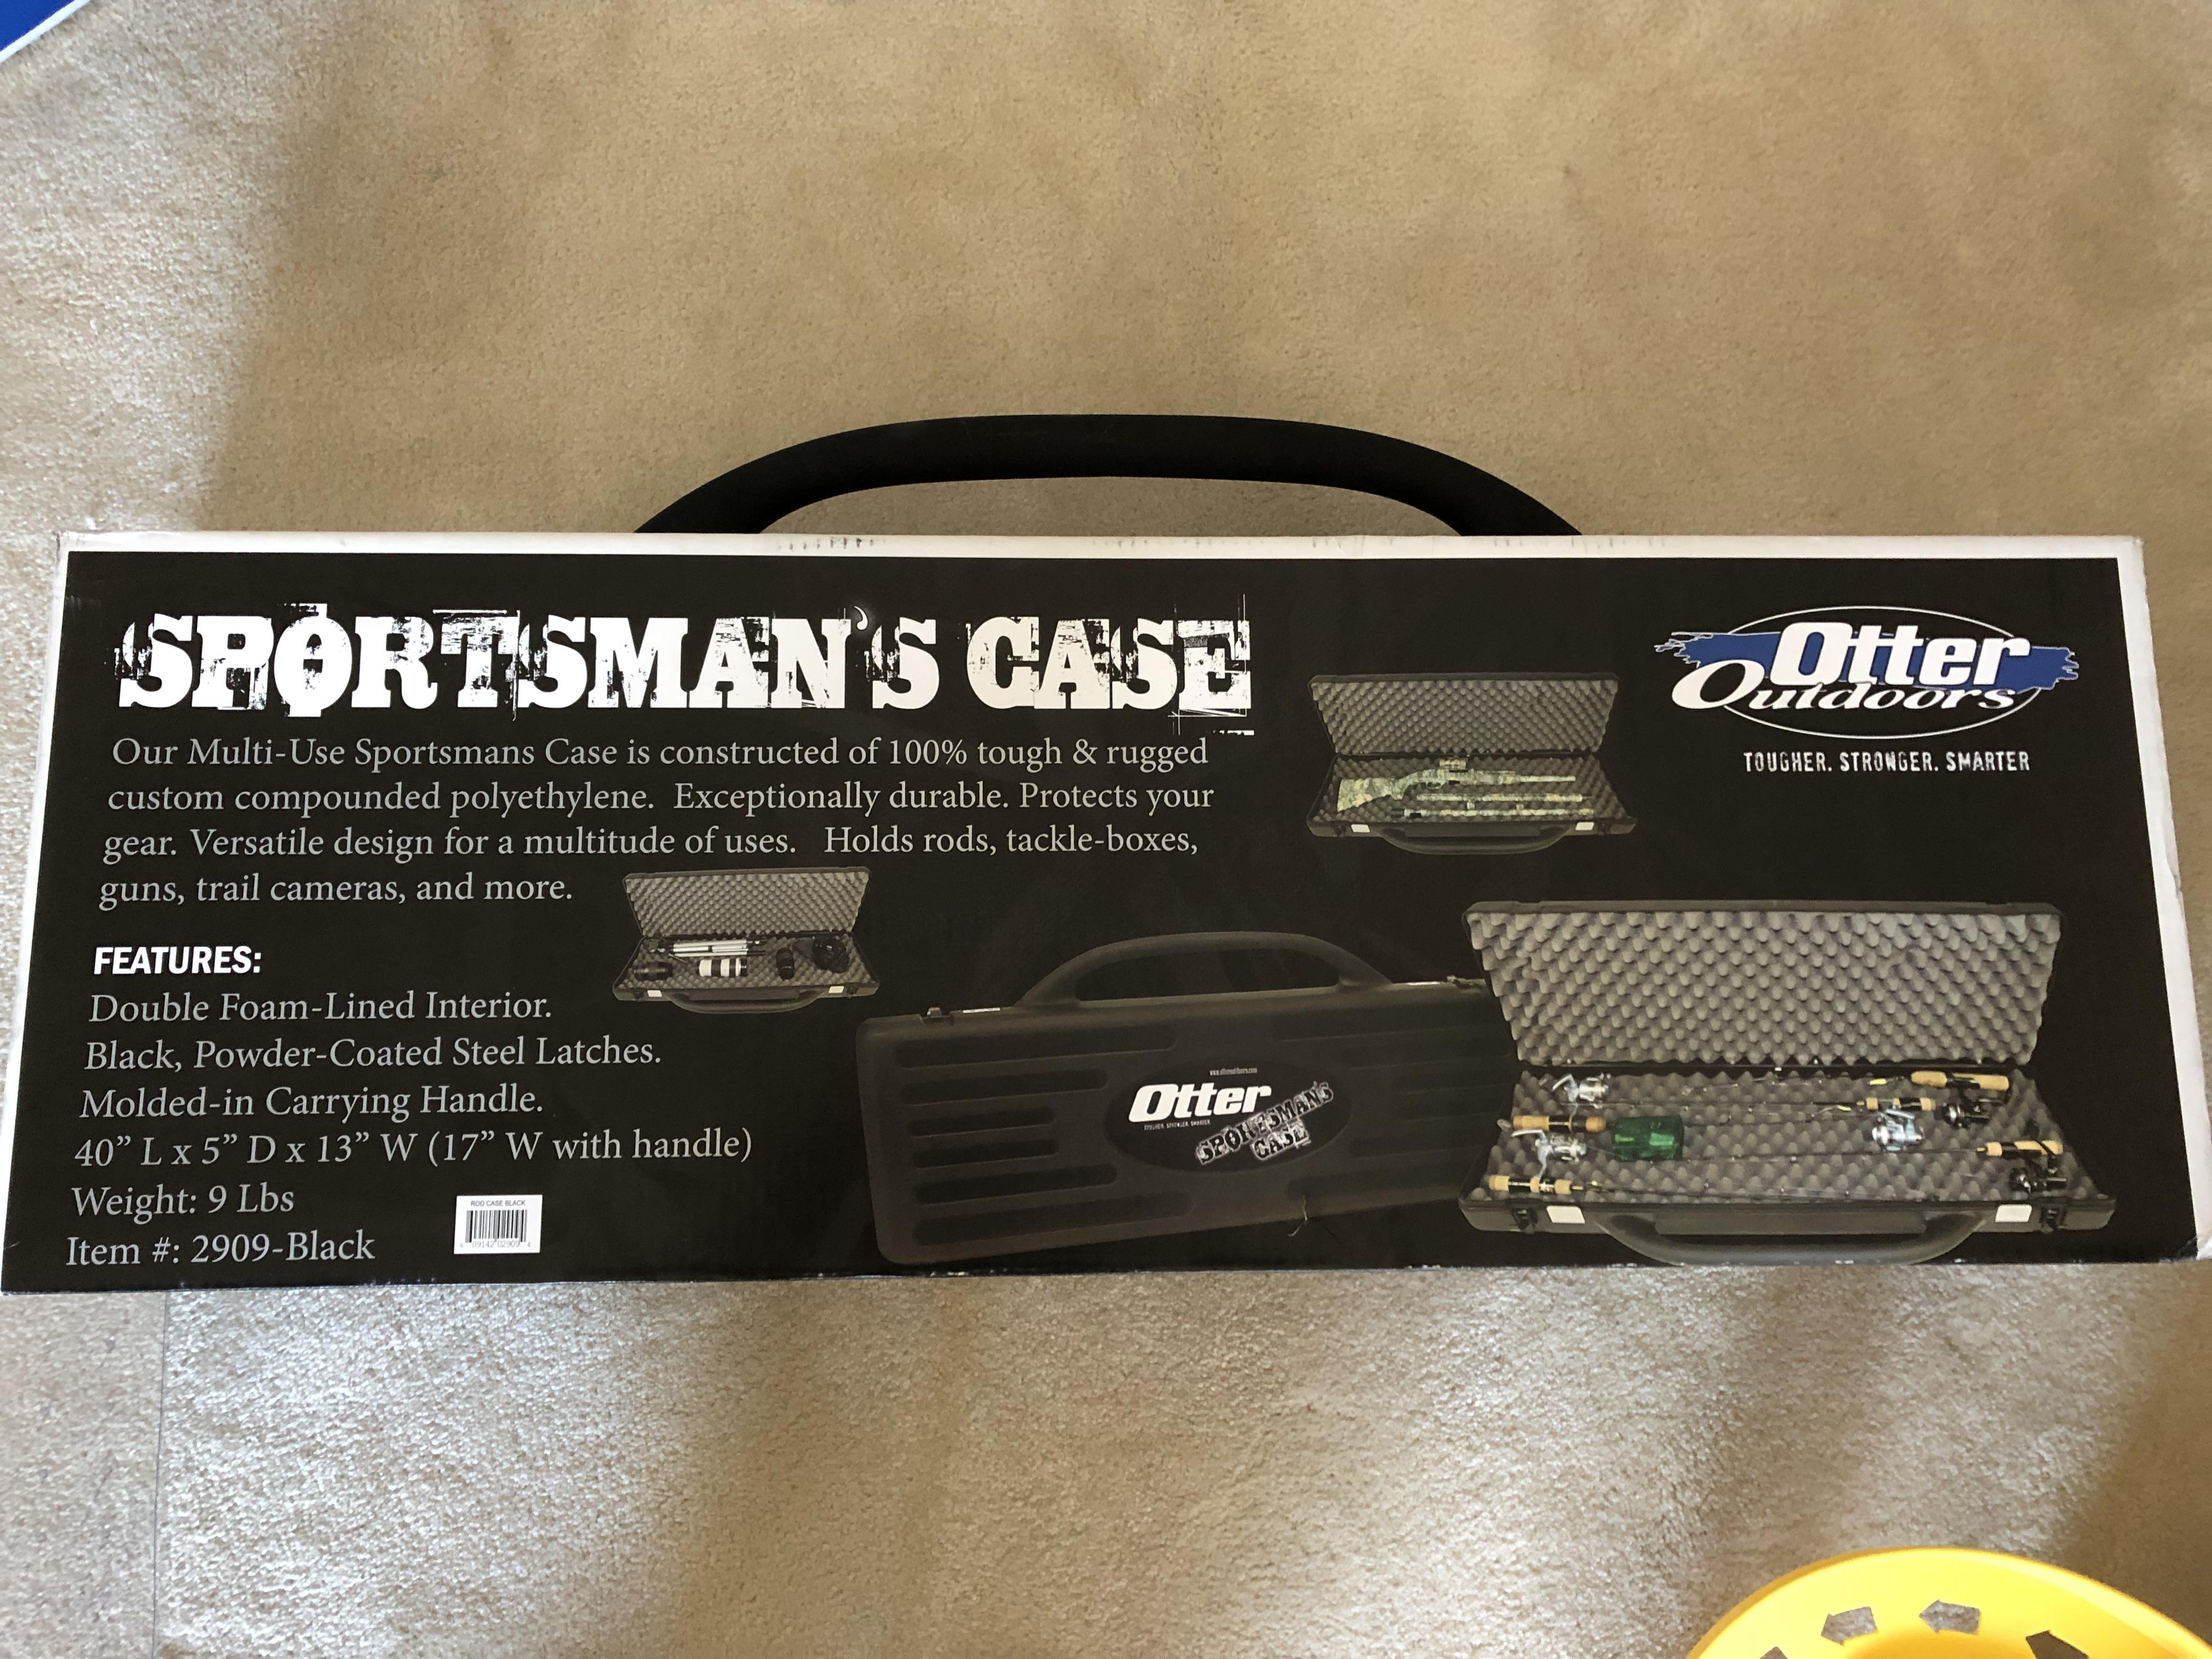 Otter Sportsman's Rod Case - Brand New - FREE LISTING-FOR SALE! List Your  Boats, Fishing, Hunting, Employment & Used Items! - FM 'Members' - Outdoor  Minnesota Fishing Reports - Hunting Forum - Ice Fishing